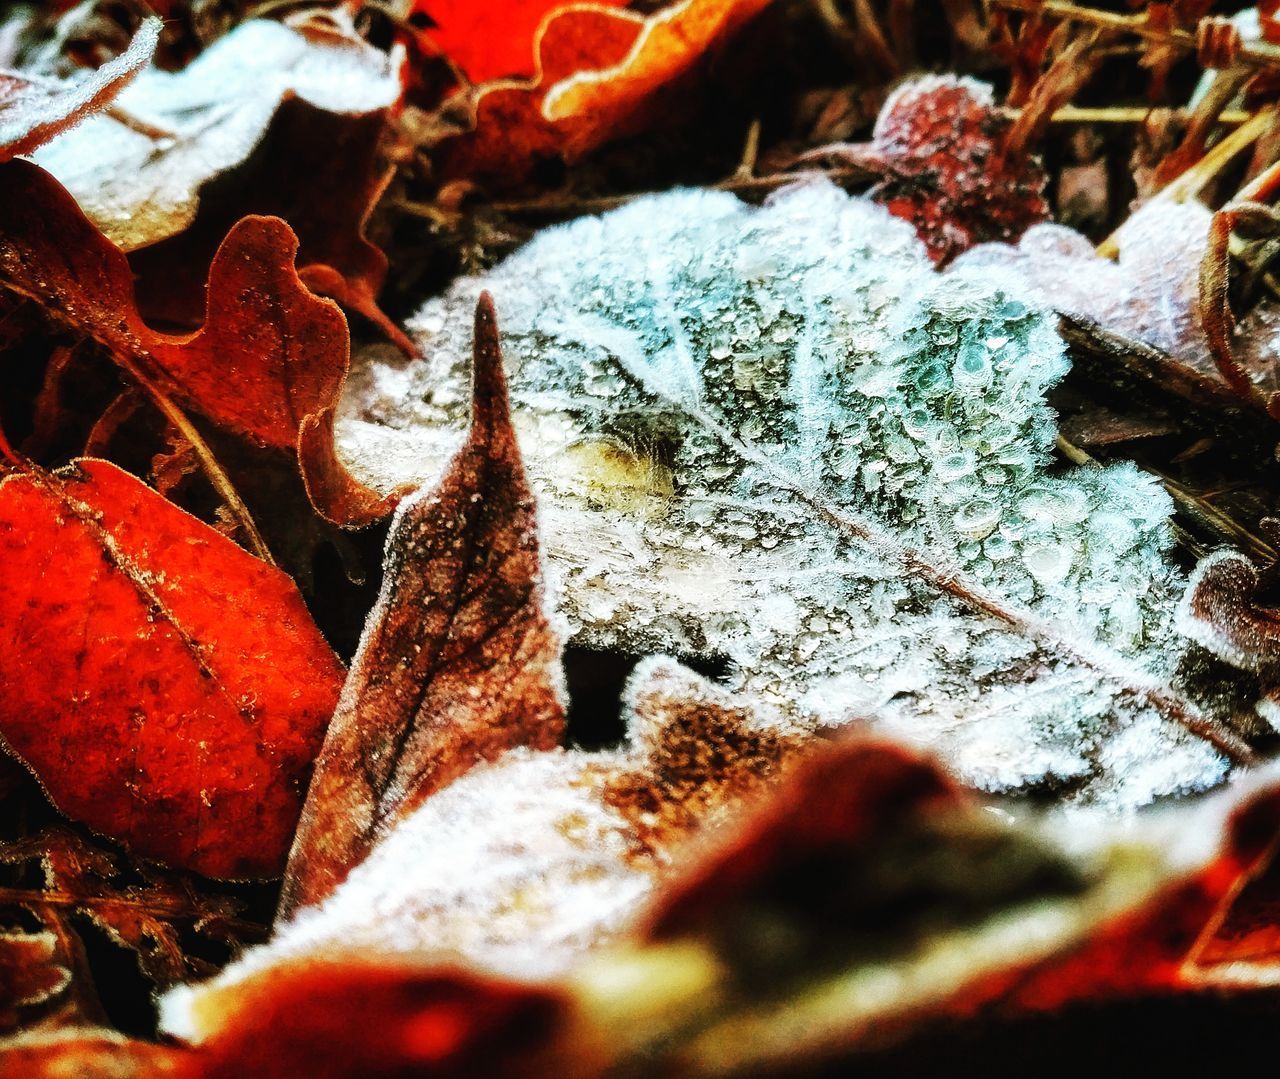 CLOSE-UP OF FROZEN DRY LEAVES DURING WINTER